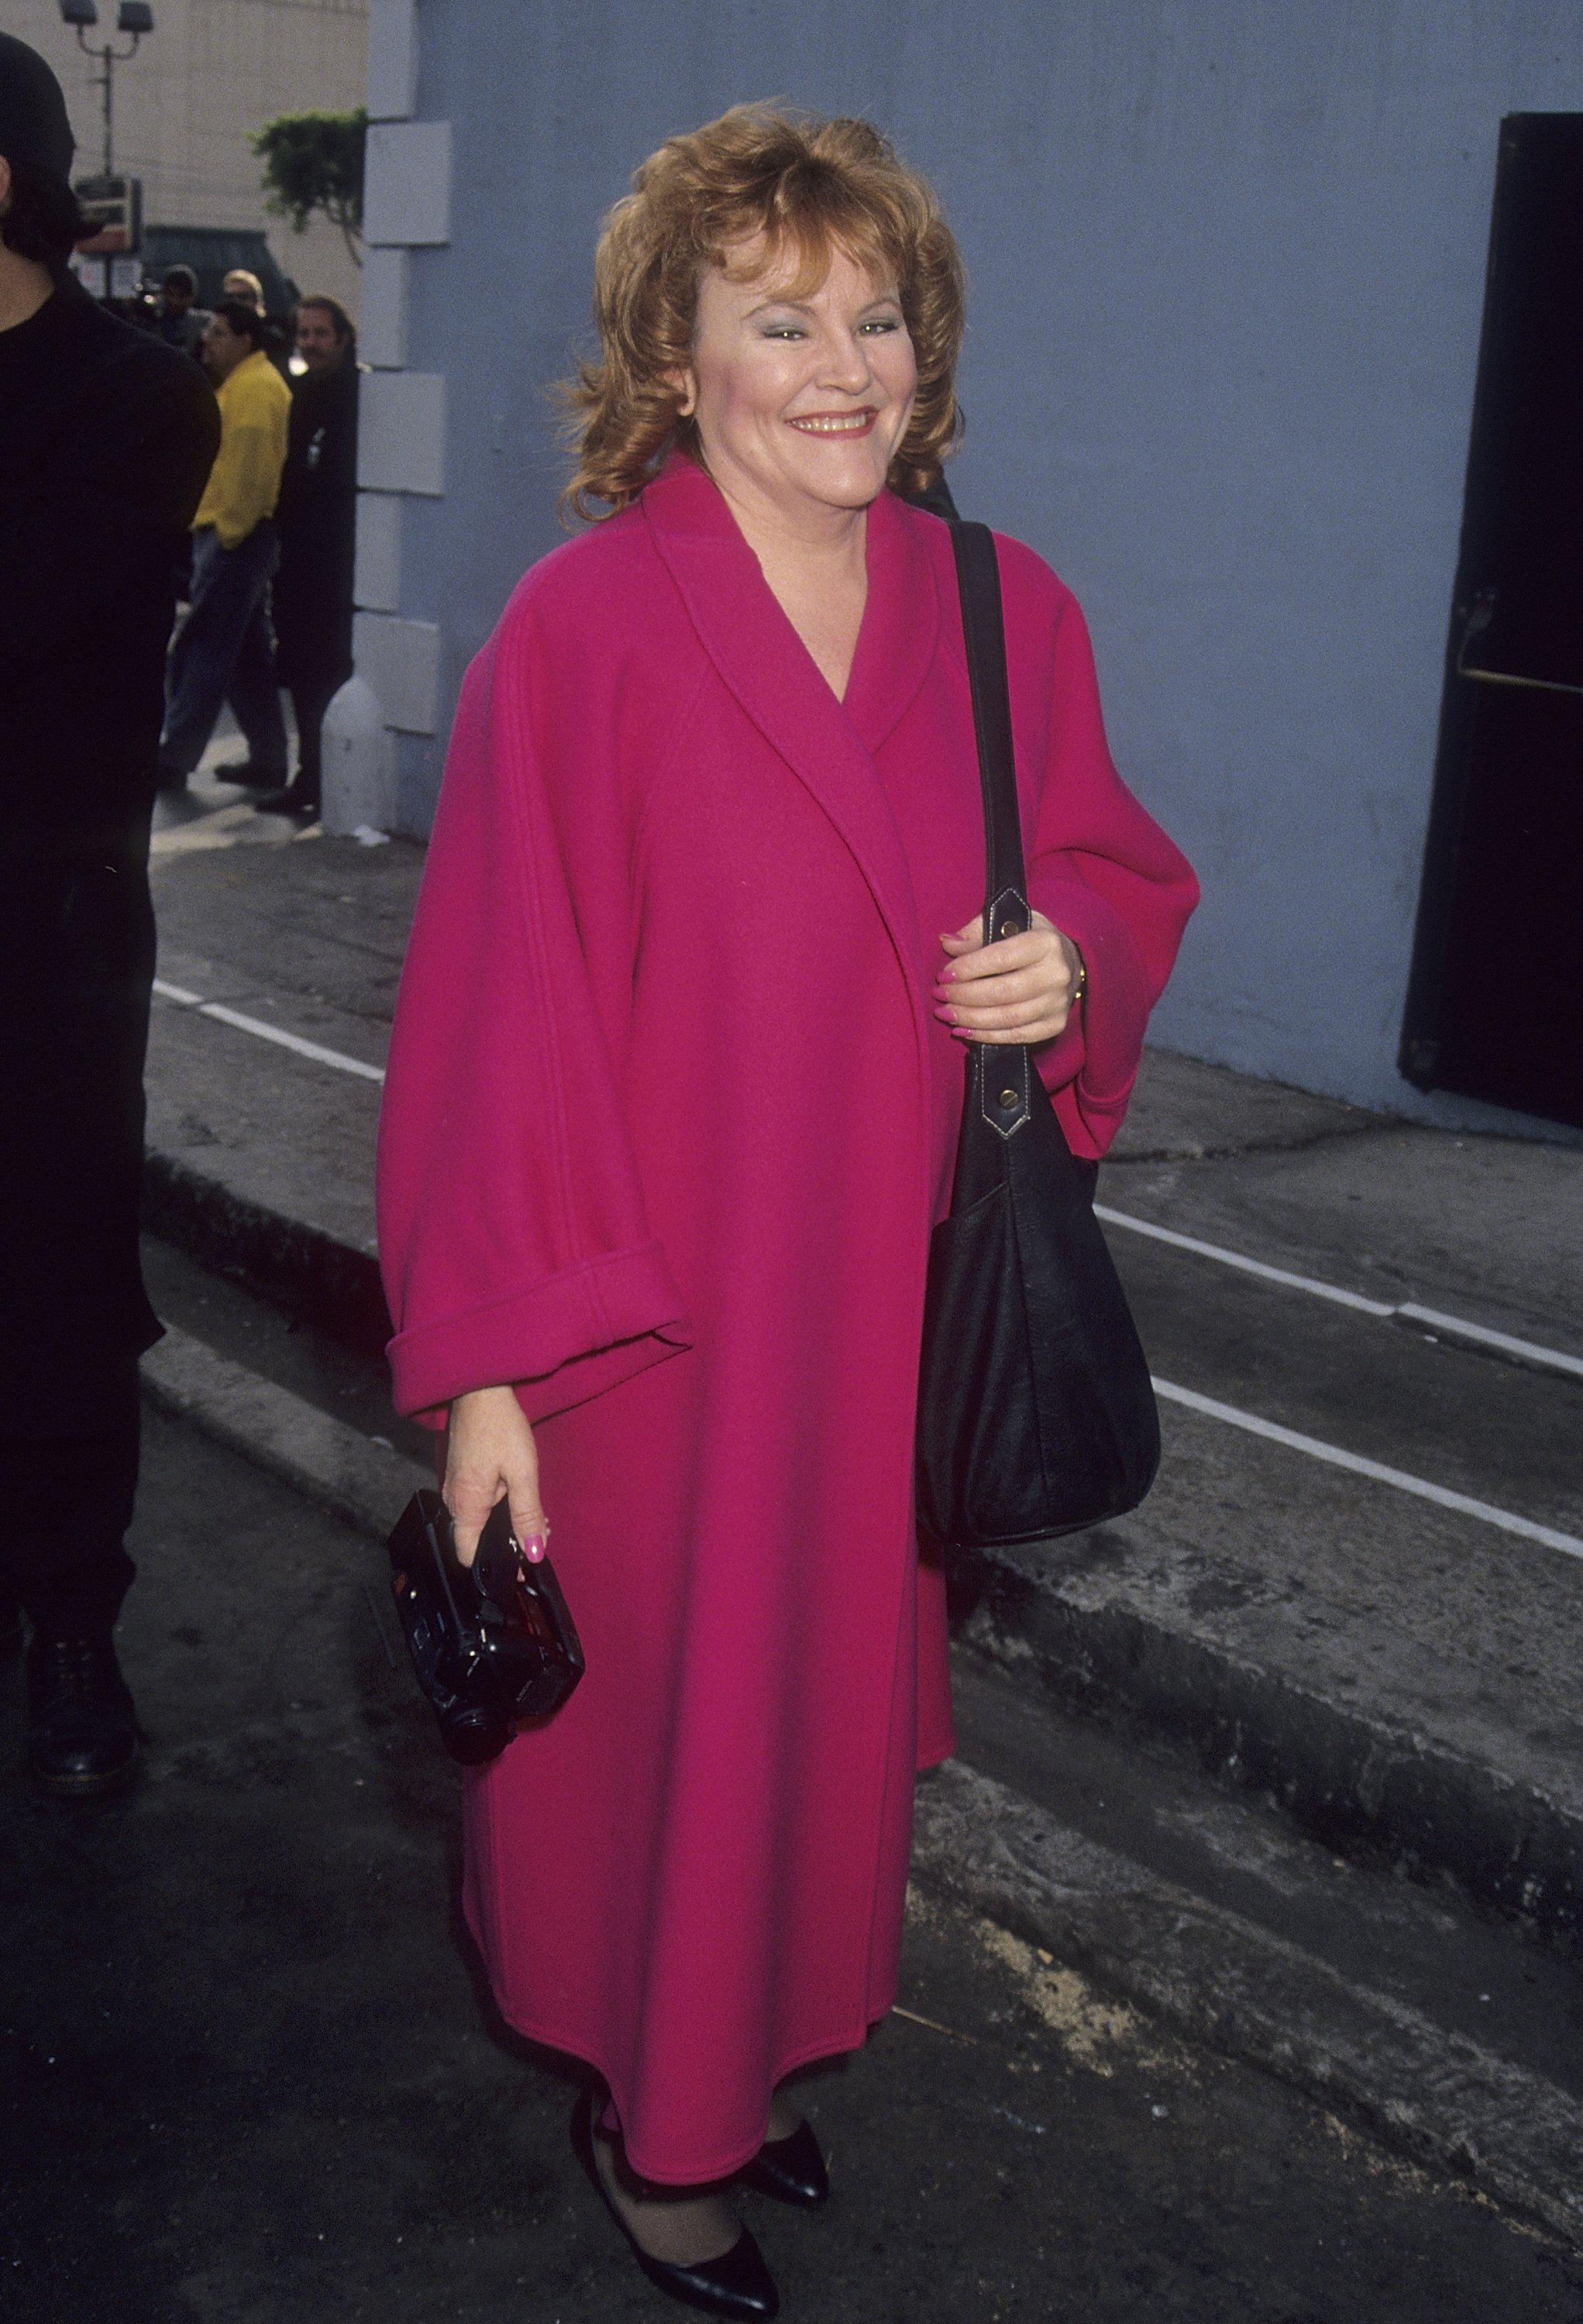  Actress Edie McClurg attends "The Howard Stern Show" Stages a Mock Funeral for KLOS's Mark Thompson and Brian Phelps on November 24, 1992 at The Palace in Hollywood, California. | Source: Getty Images